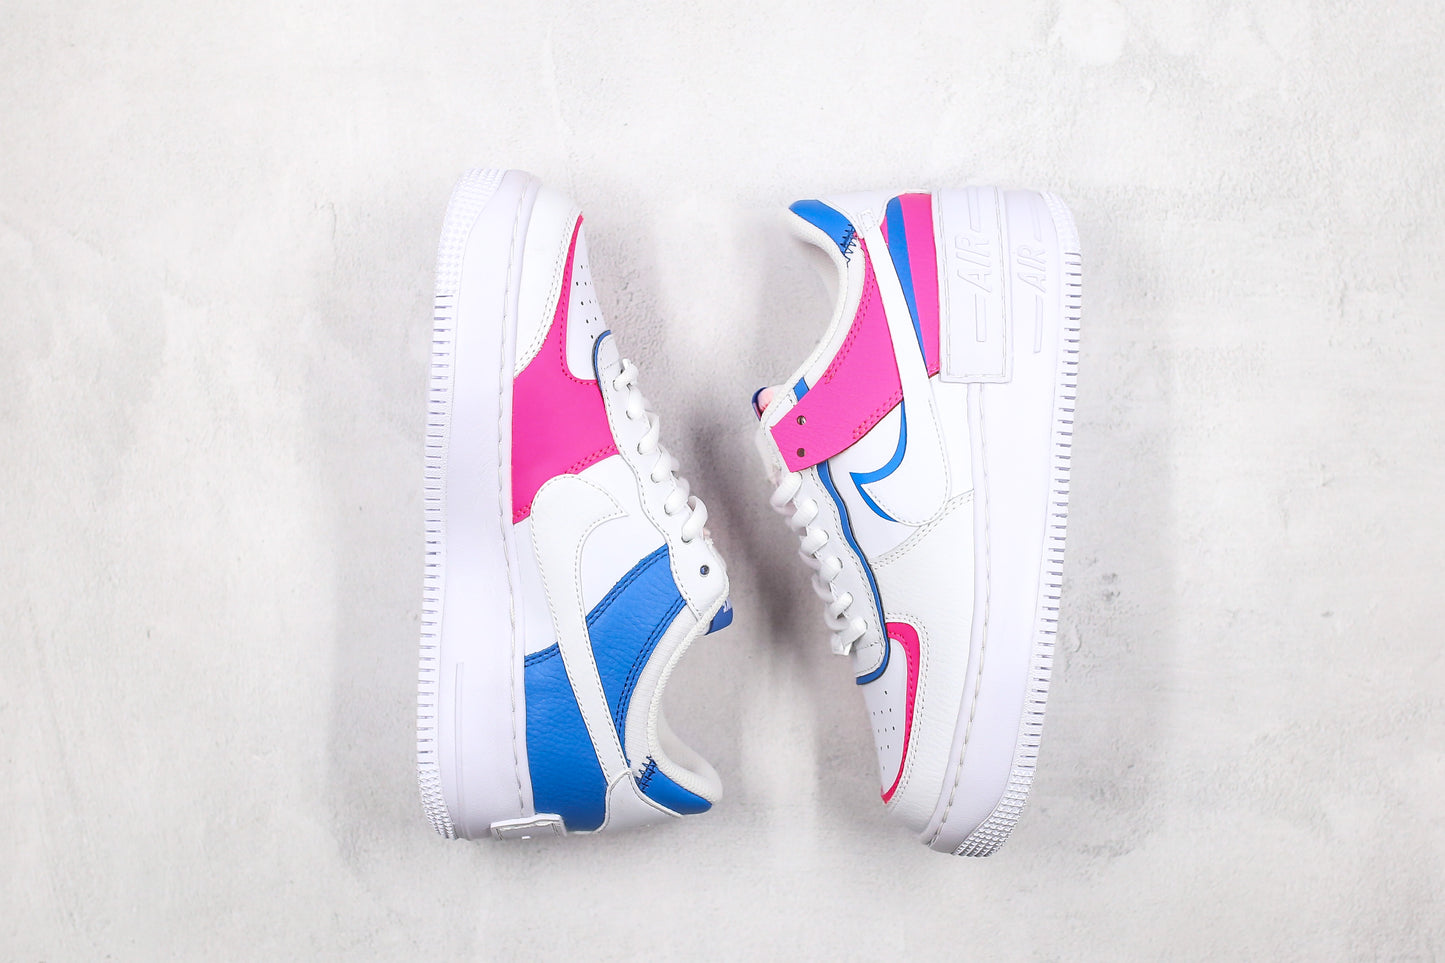 Air Force 1 '07 Shadow "White Blue Pink"